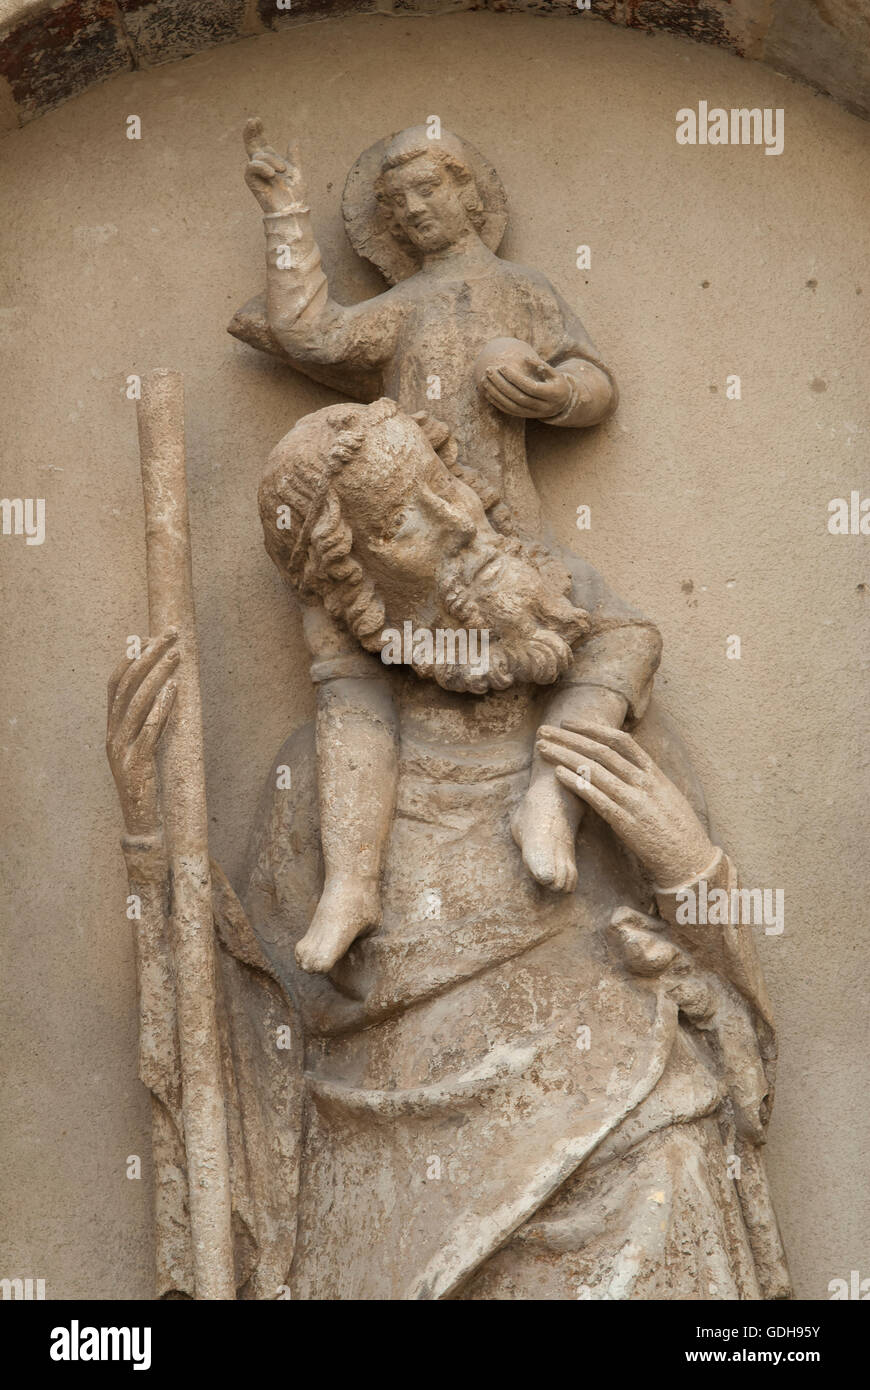 St Christopher 14th-century statue statue plaque fixed to a village wall Boulbon south of France 2016.  HOMER SYKES Stock Photo